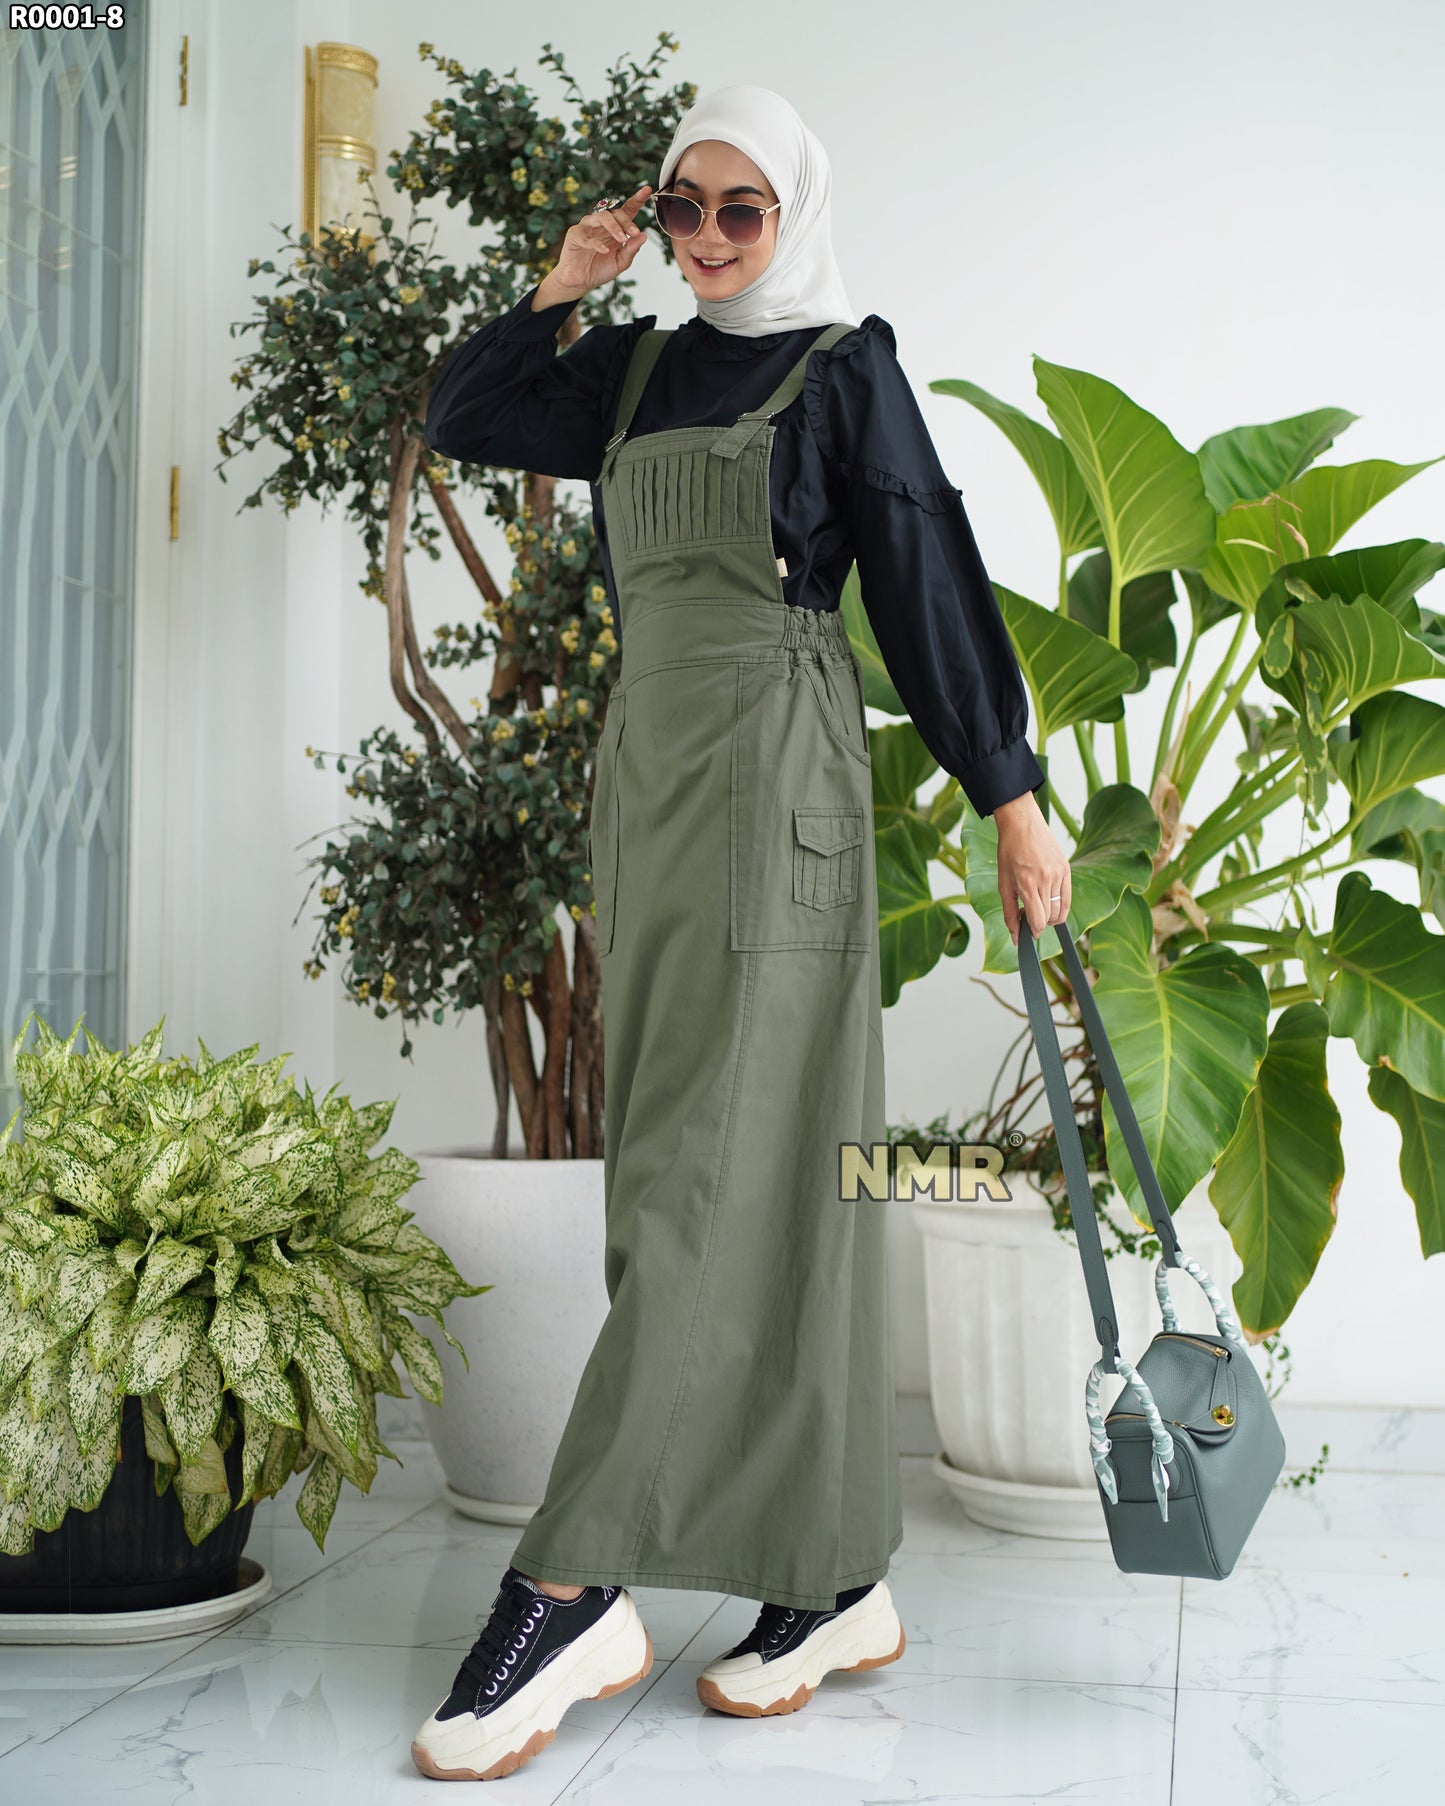 NMR Gamis Jumpsuit Overall Baby Canvas Vol R001-8